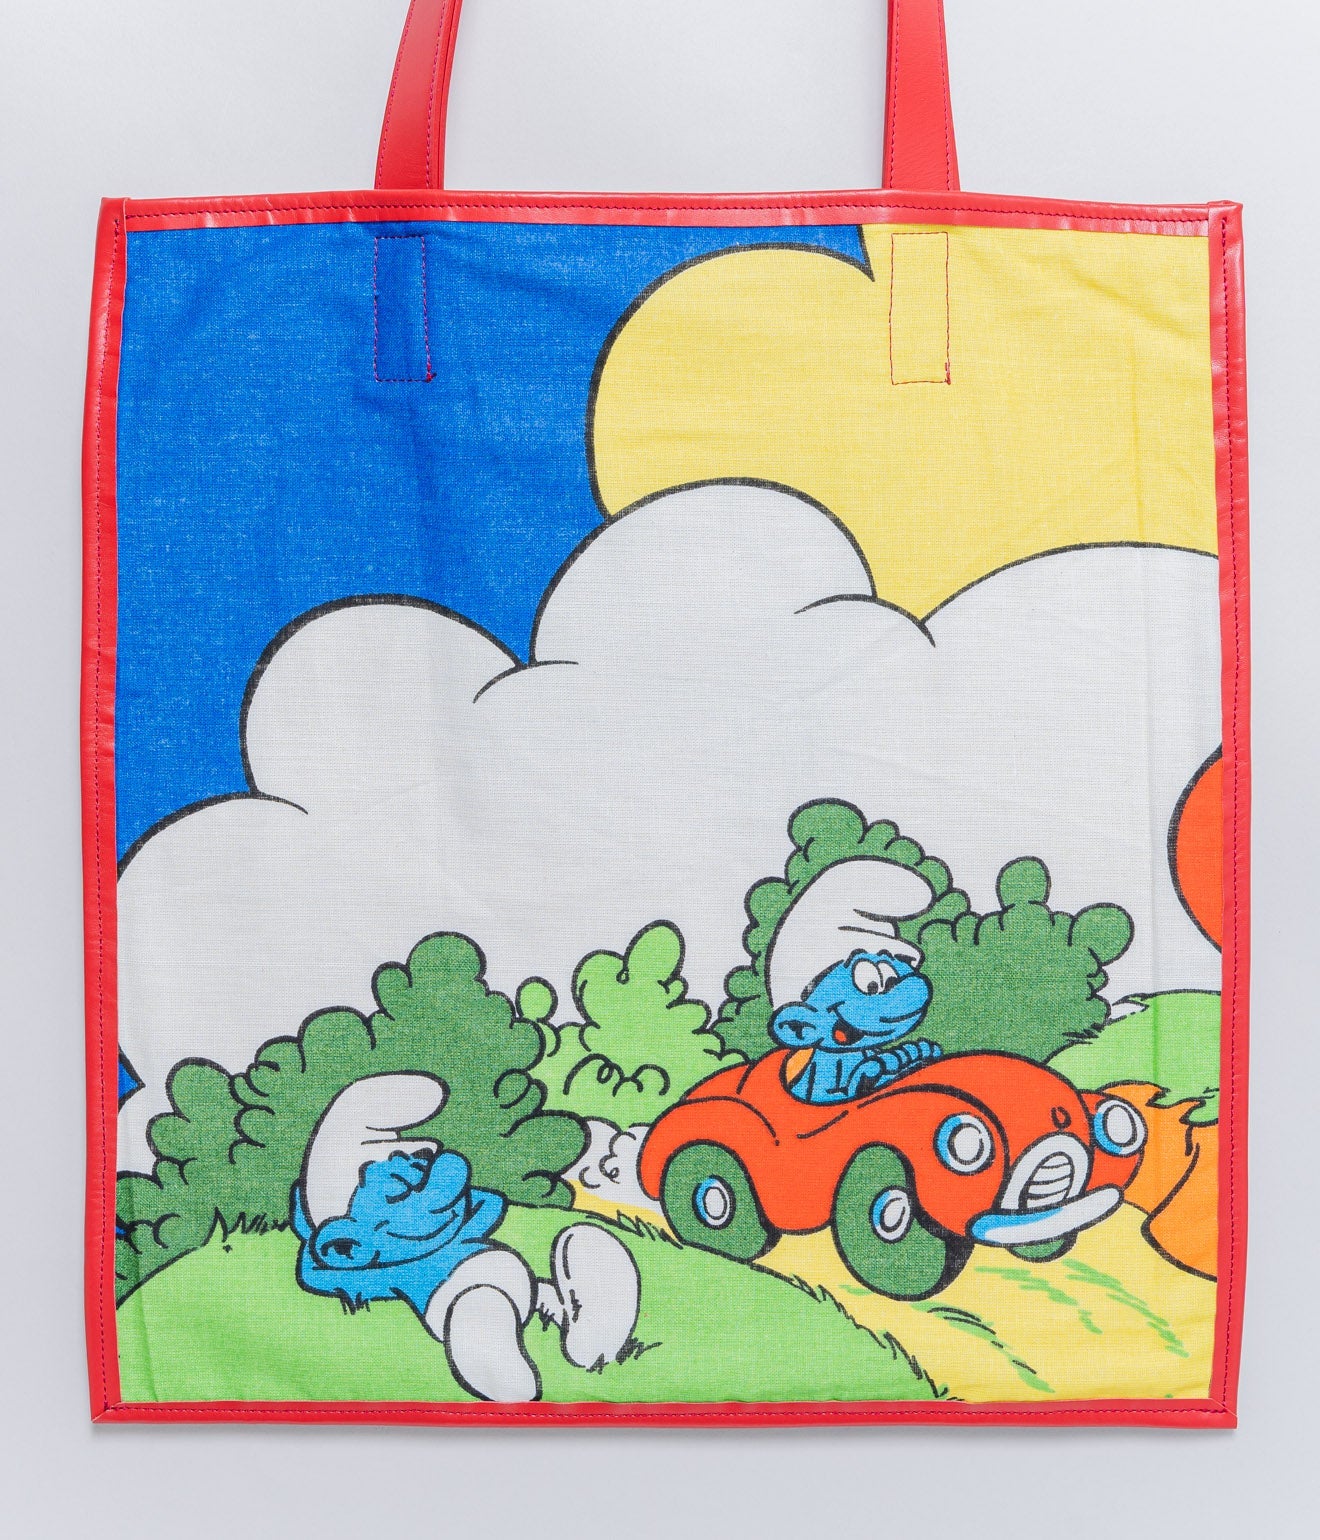 WEAREALLANIMALS UPCYCLE ”Piping Flat Tote -Vintage Smurf Fabric-" #11 - WEAREALLANIMALS